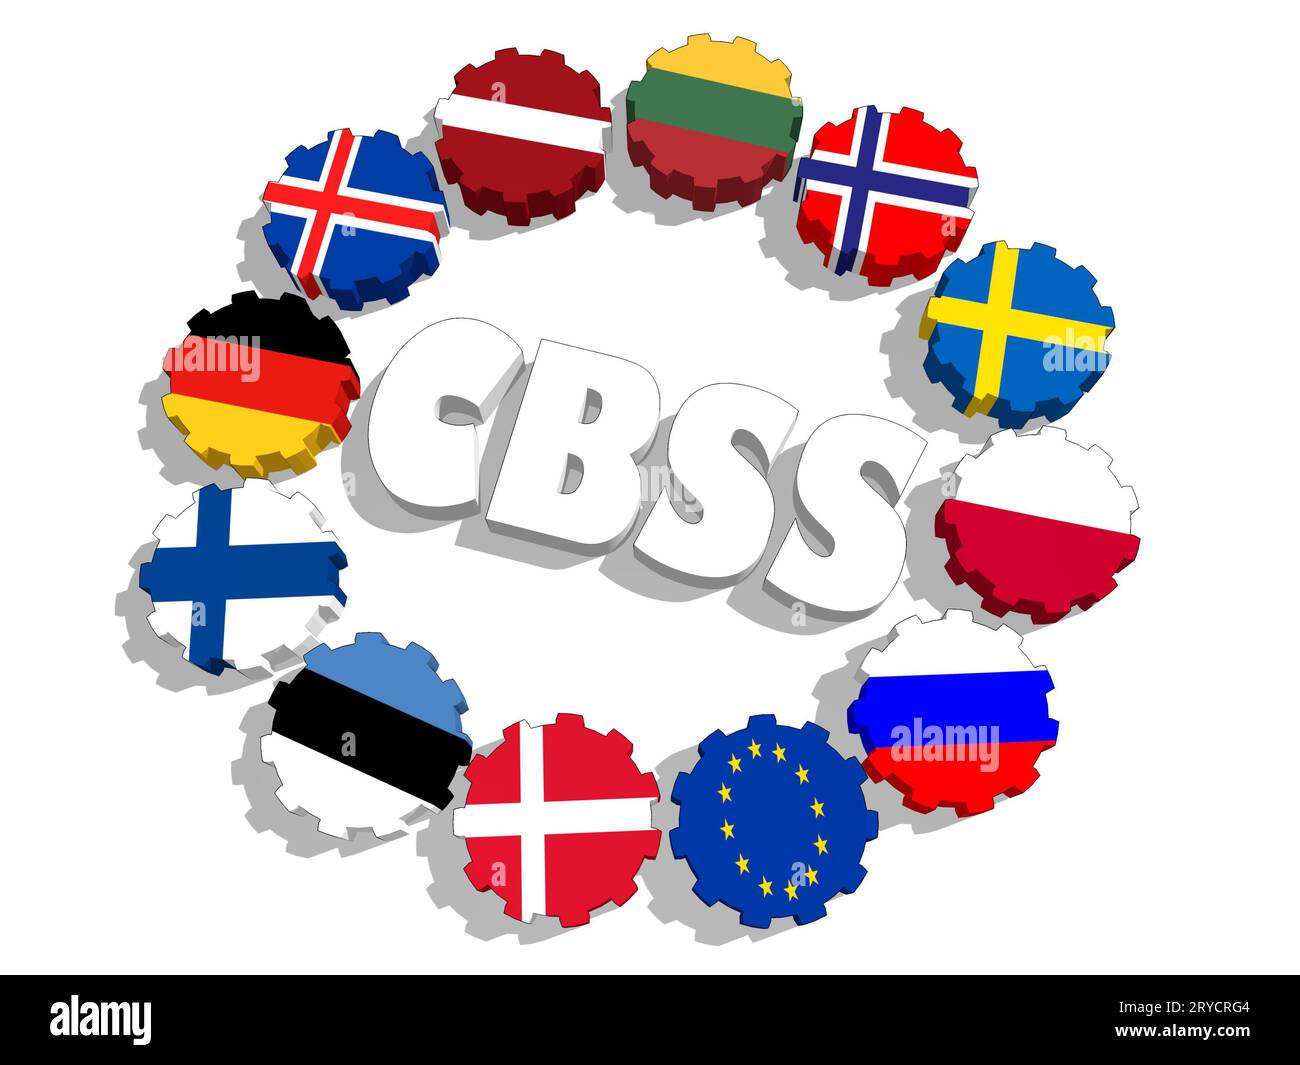 Council of the Baltic Sea States members national flags Stock Photo